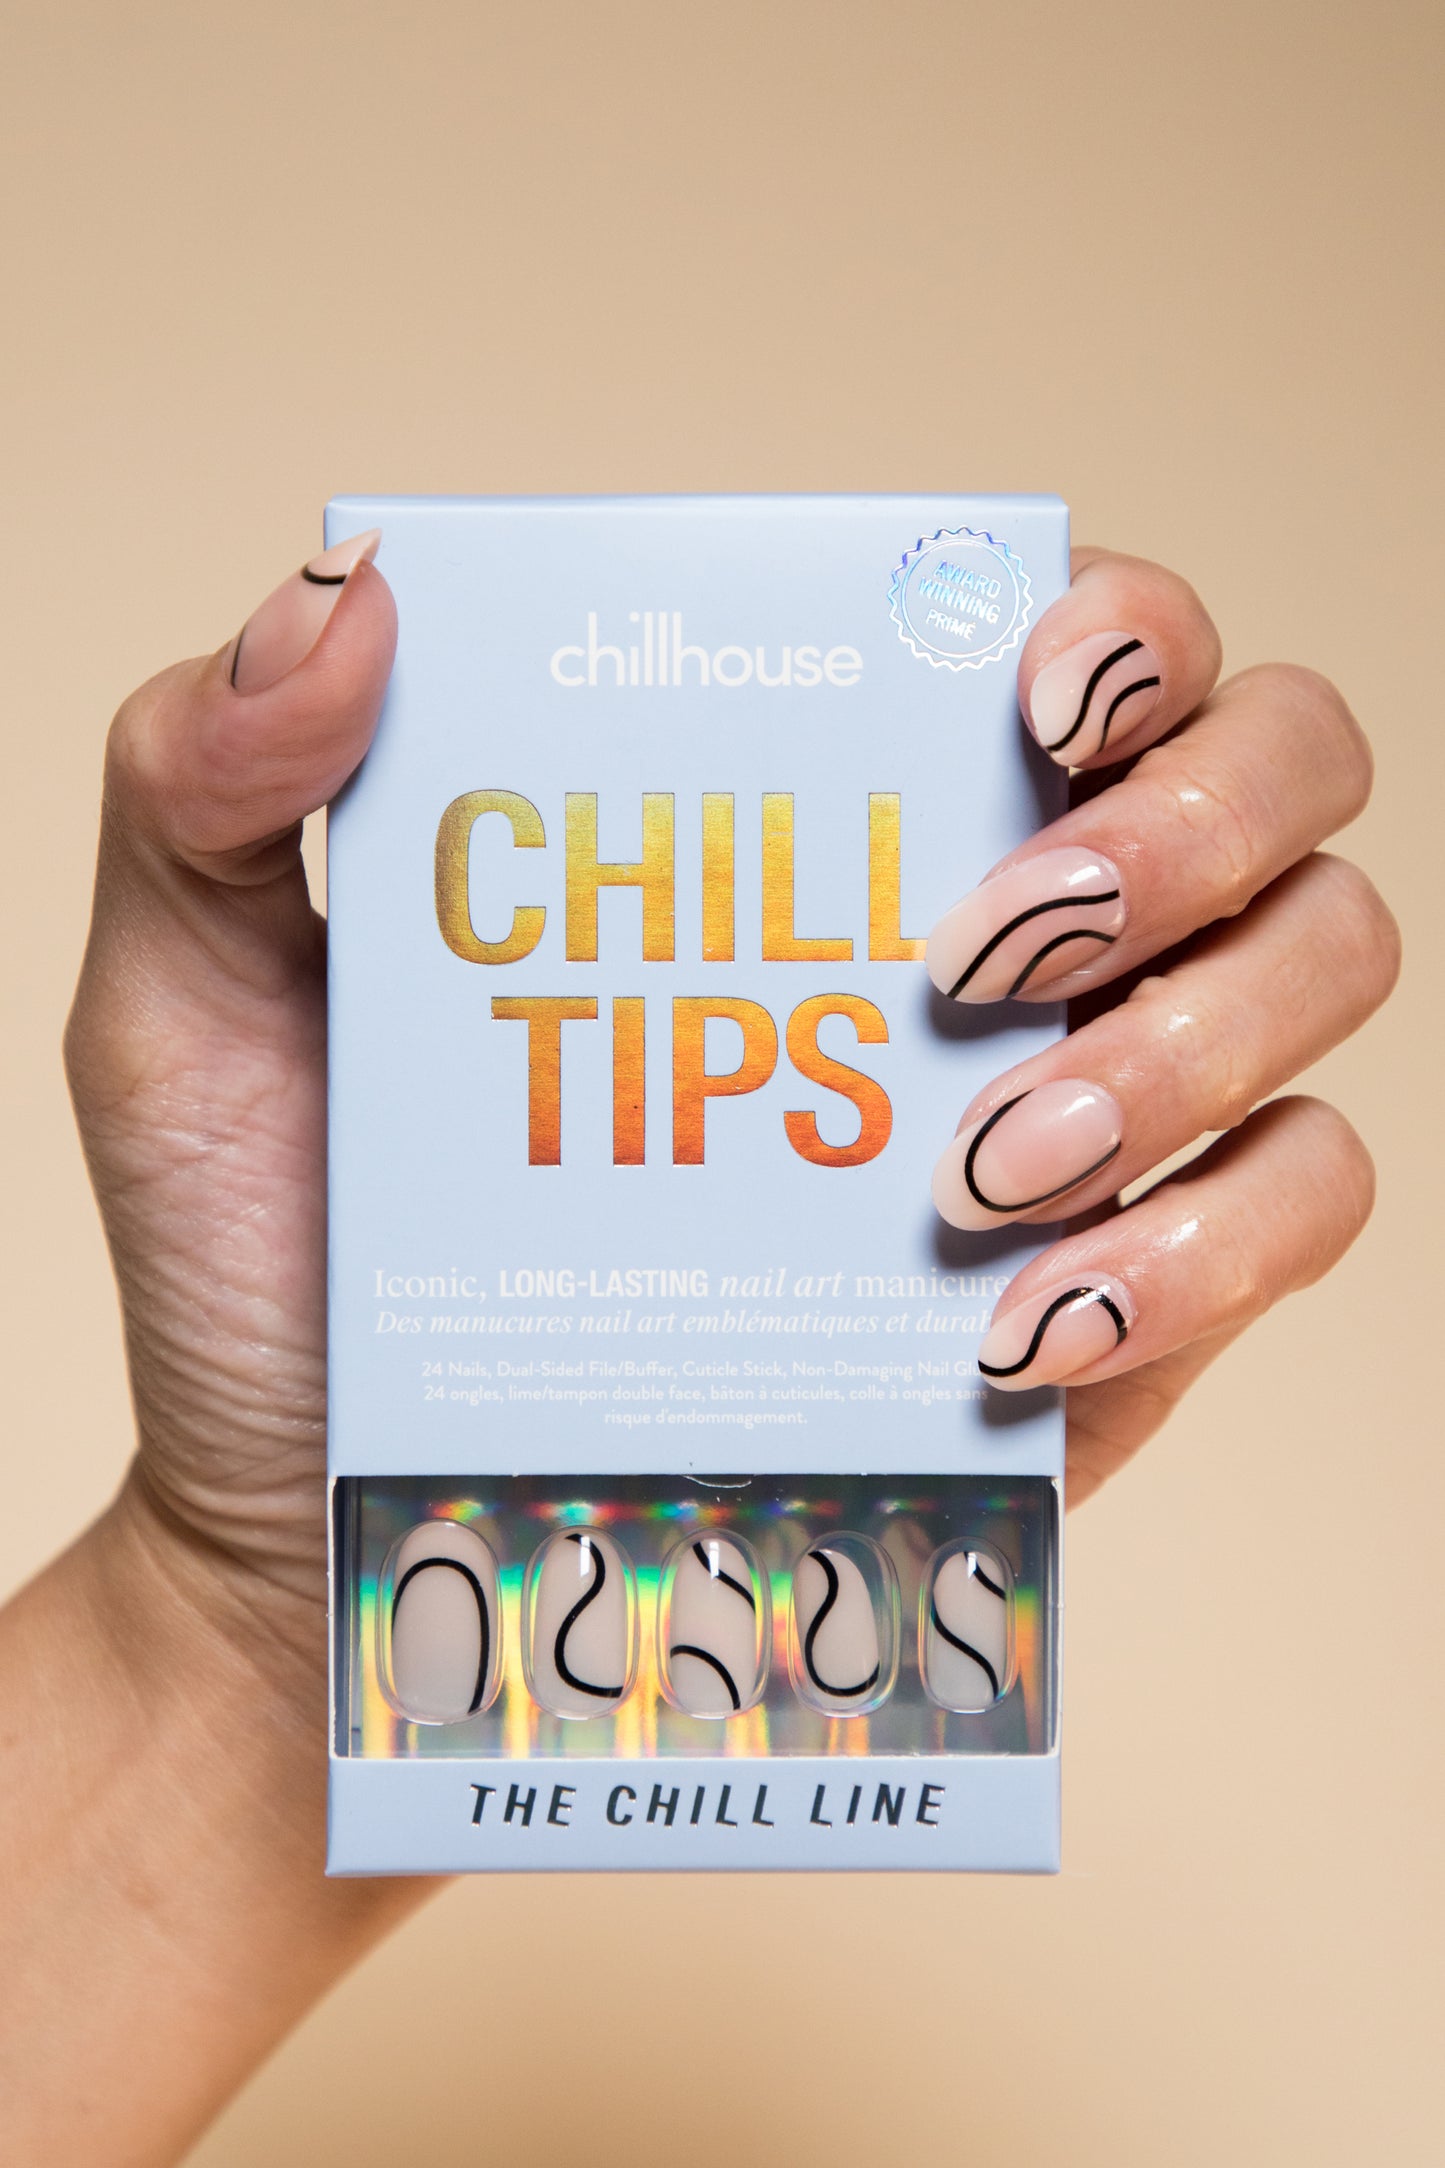 Chill Tips - The Chill Line by Chillhouse